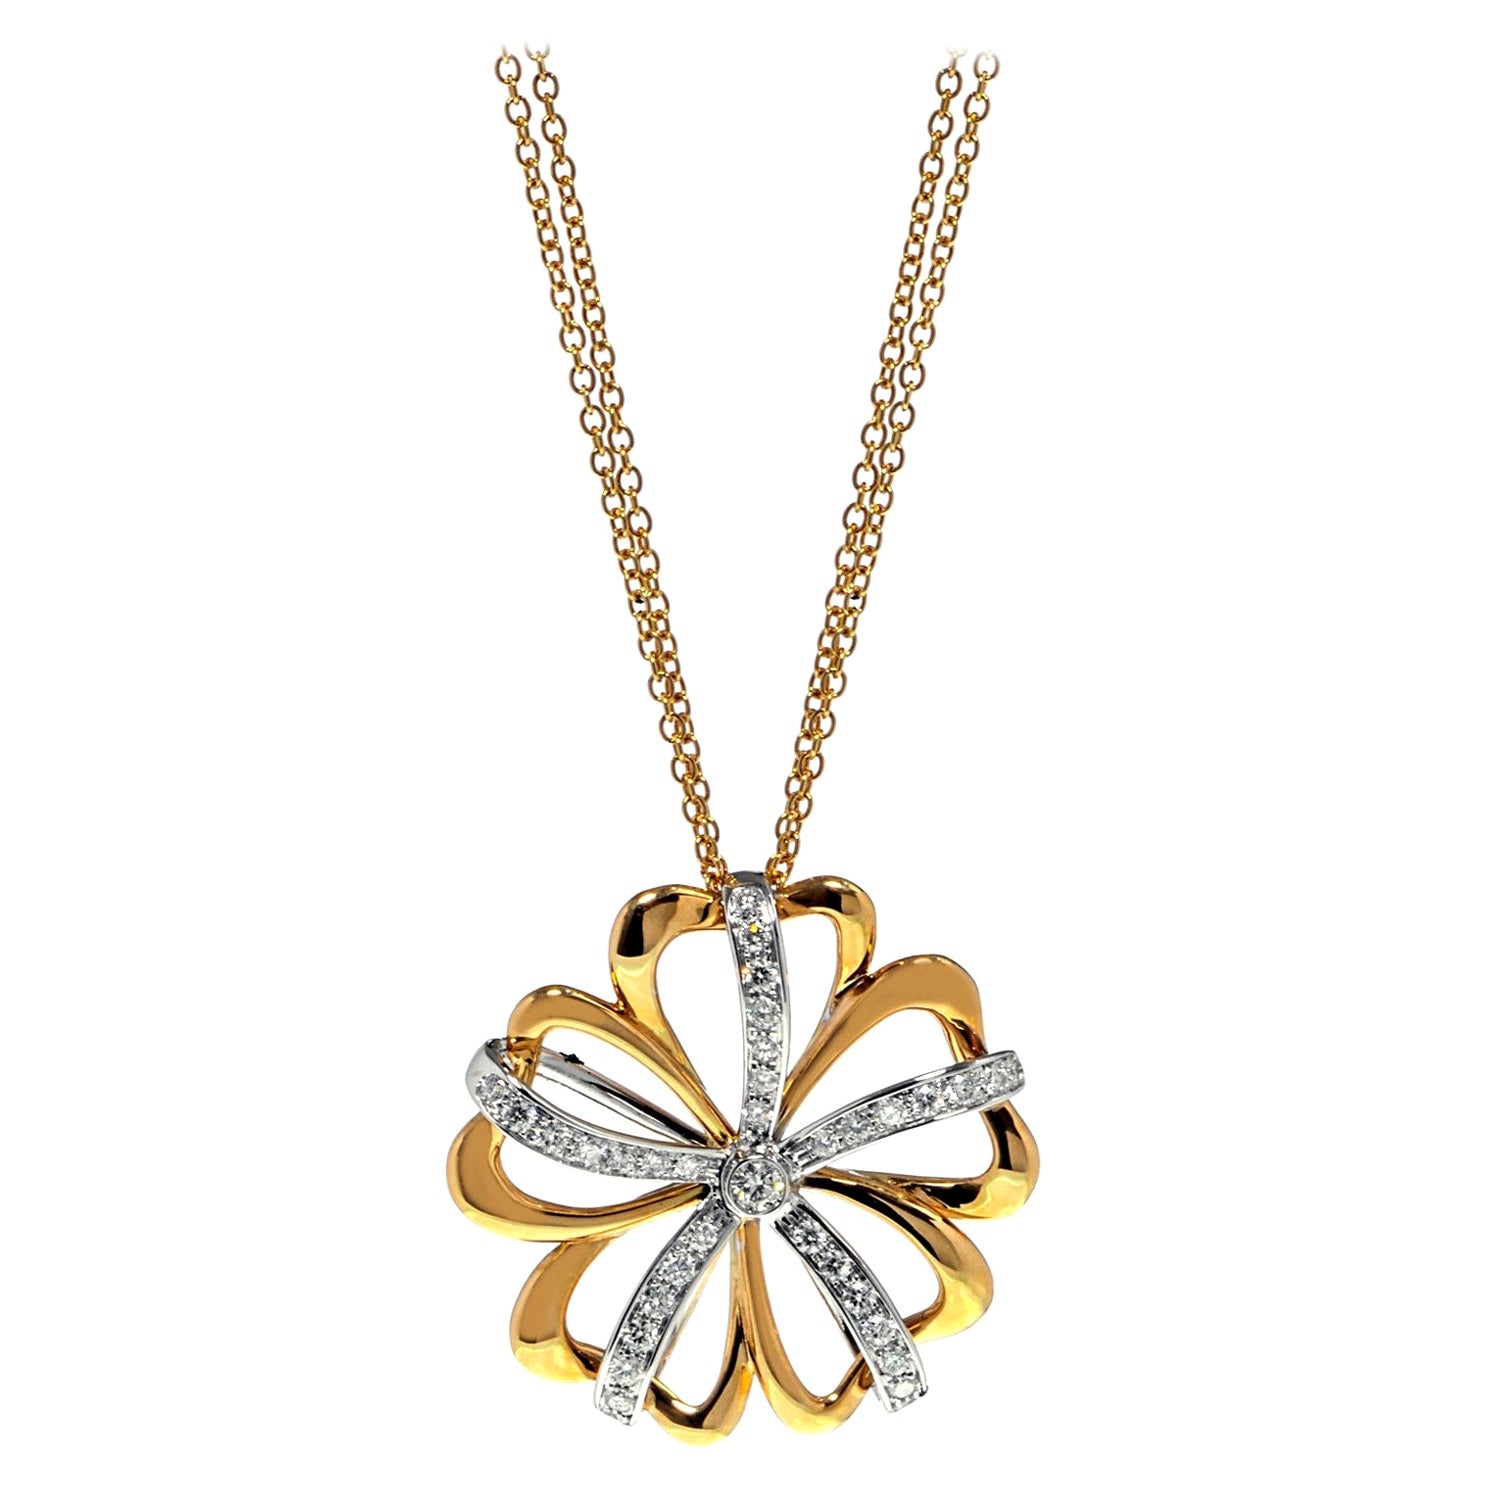 Luca Carati 18K Yellow & White Gold Diamond Flower Pendant Necklace 0.86Cttw For Sale